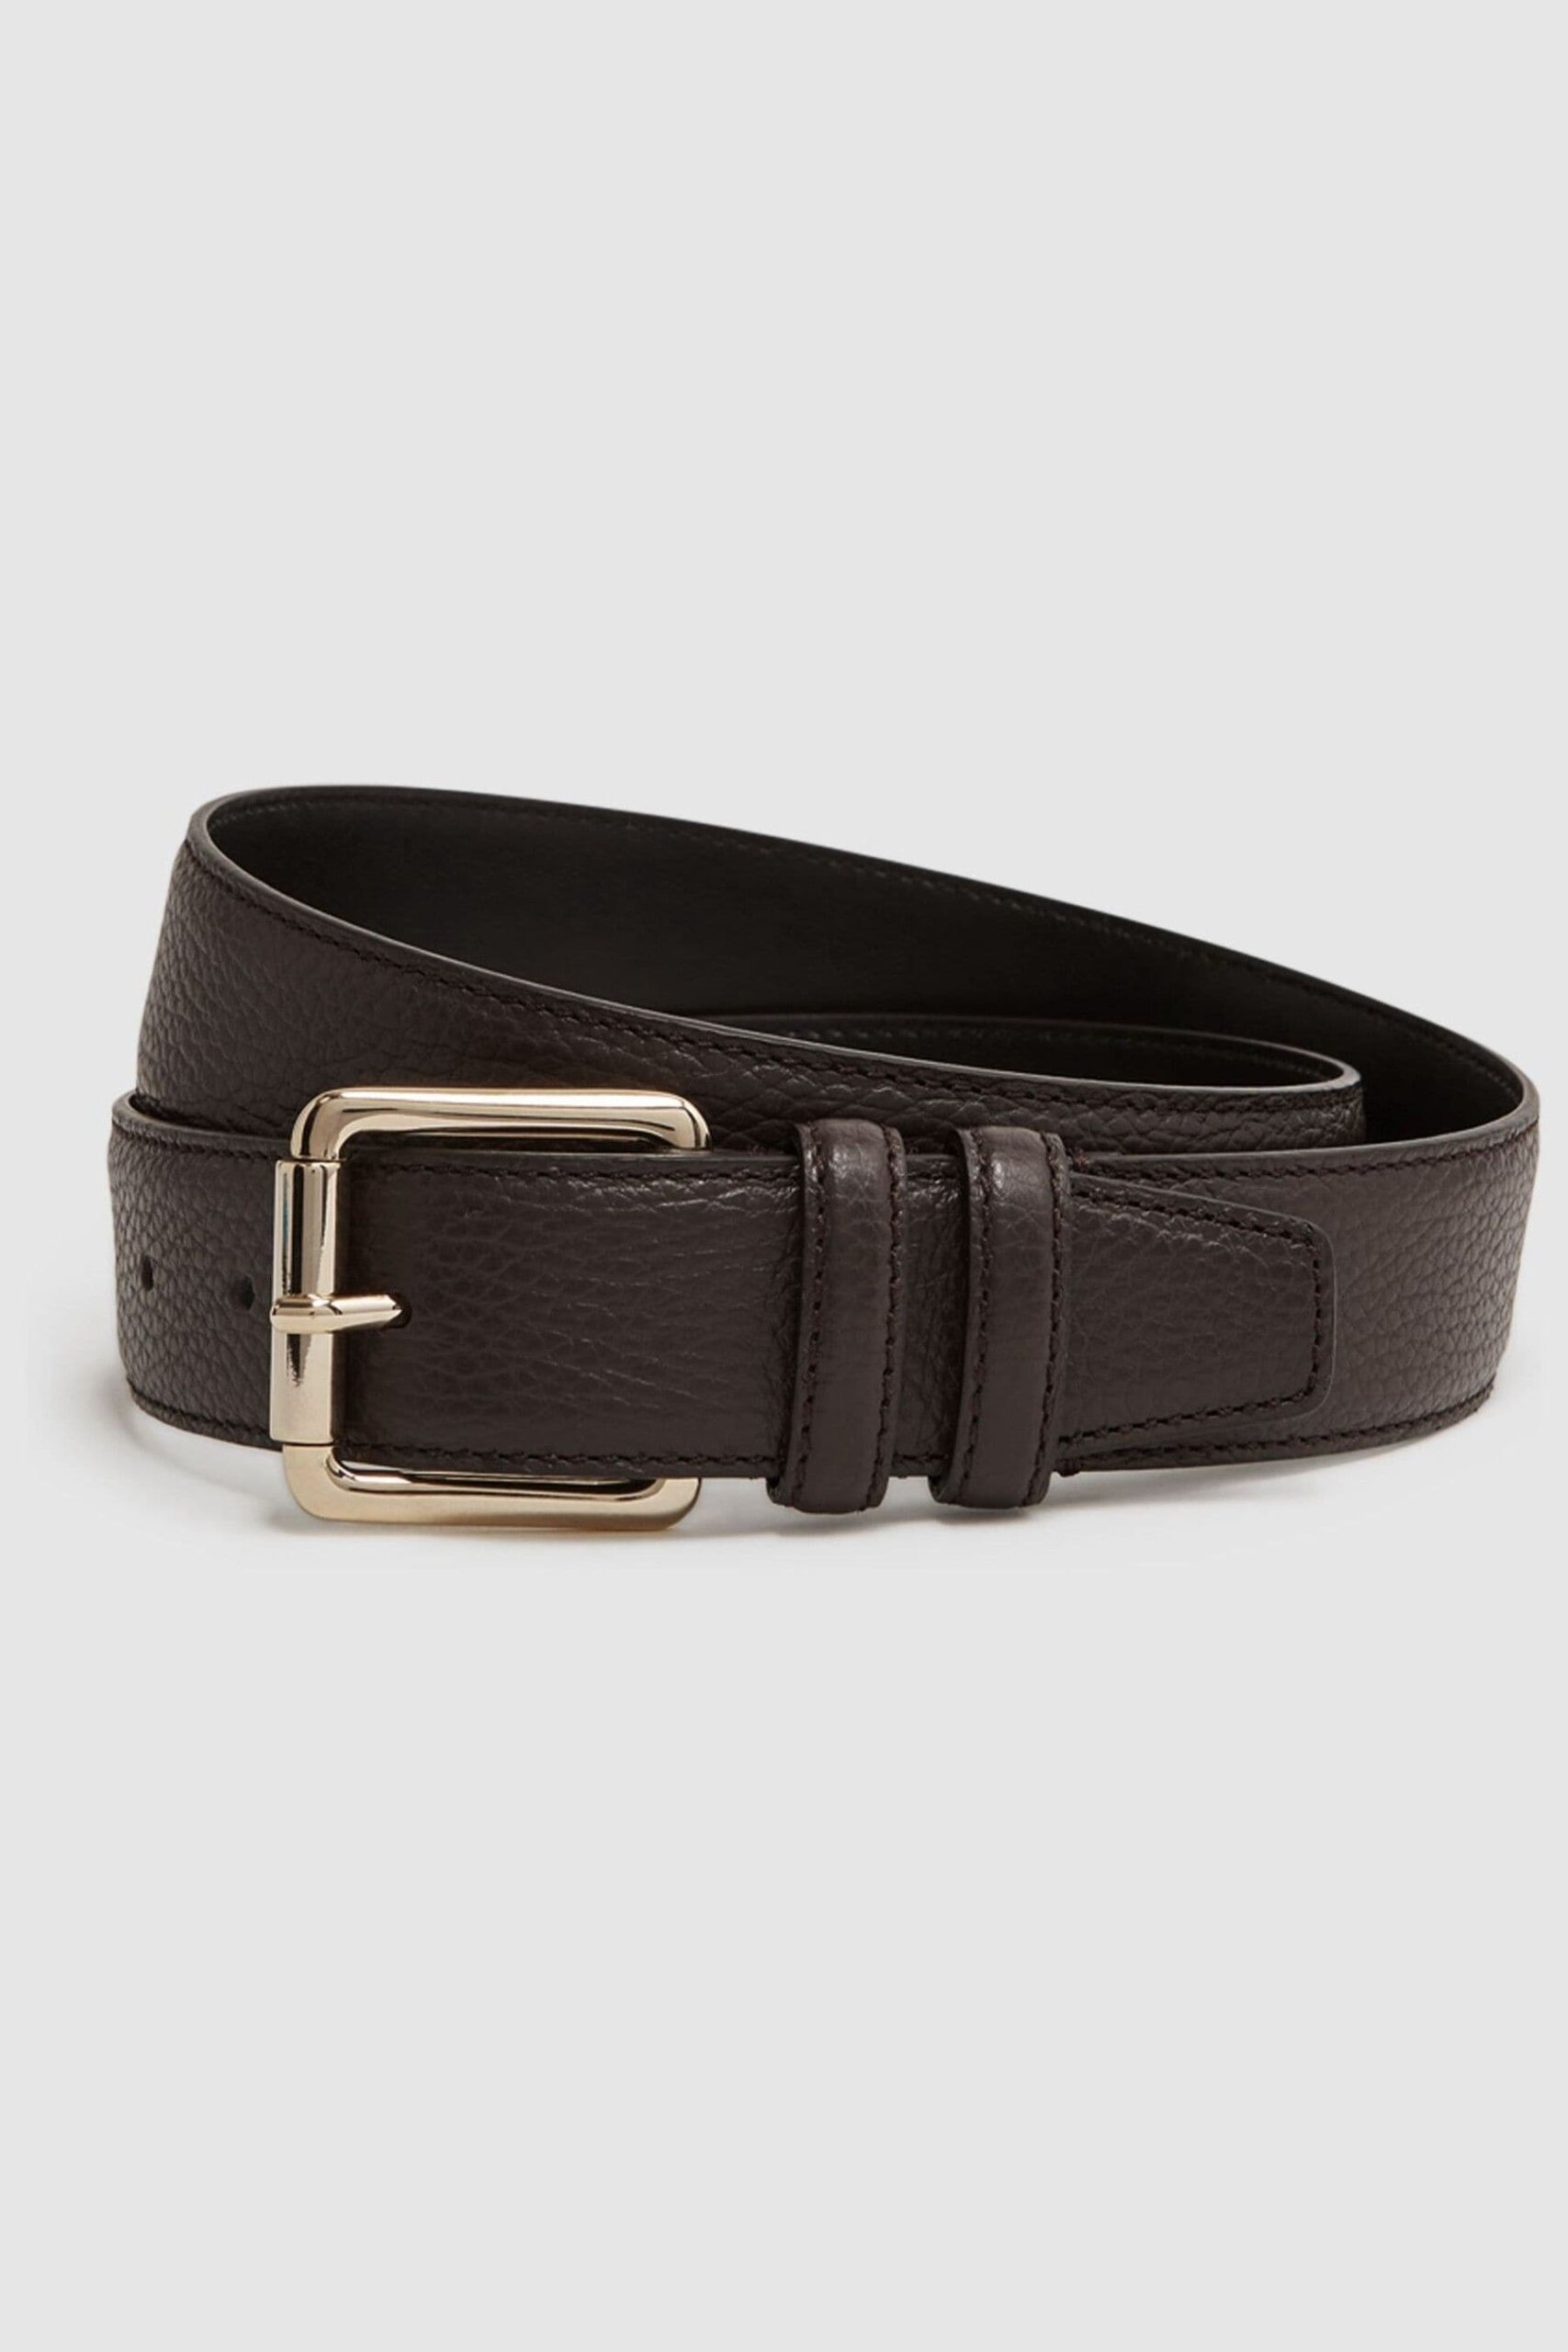 Lucas - Chocolate Grained Leather Belt